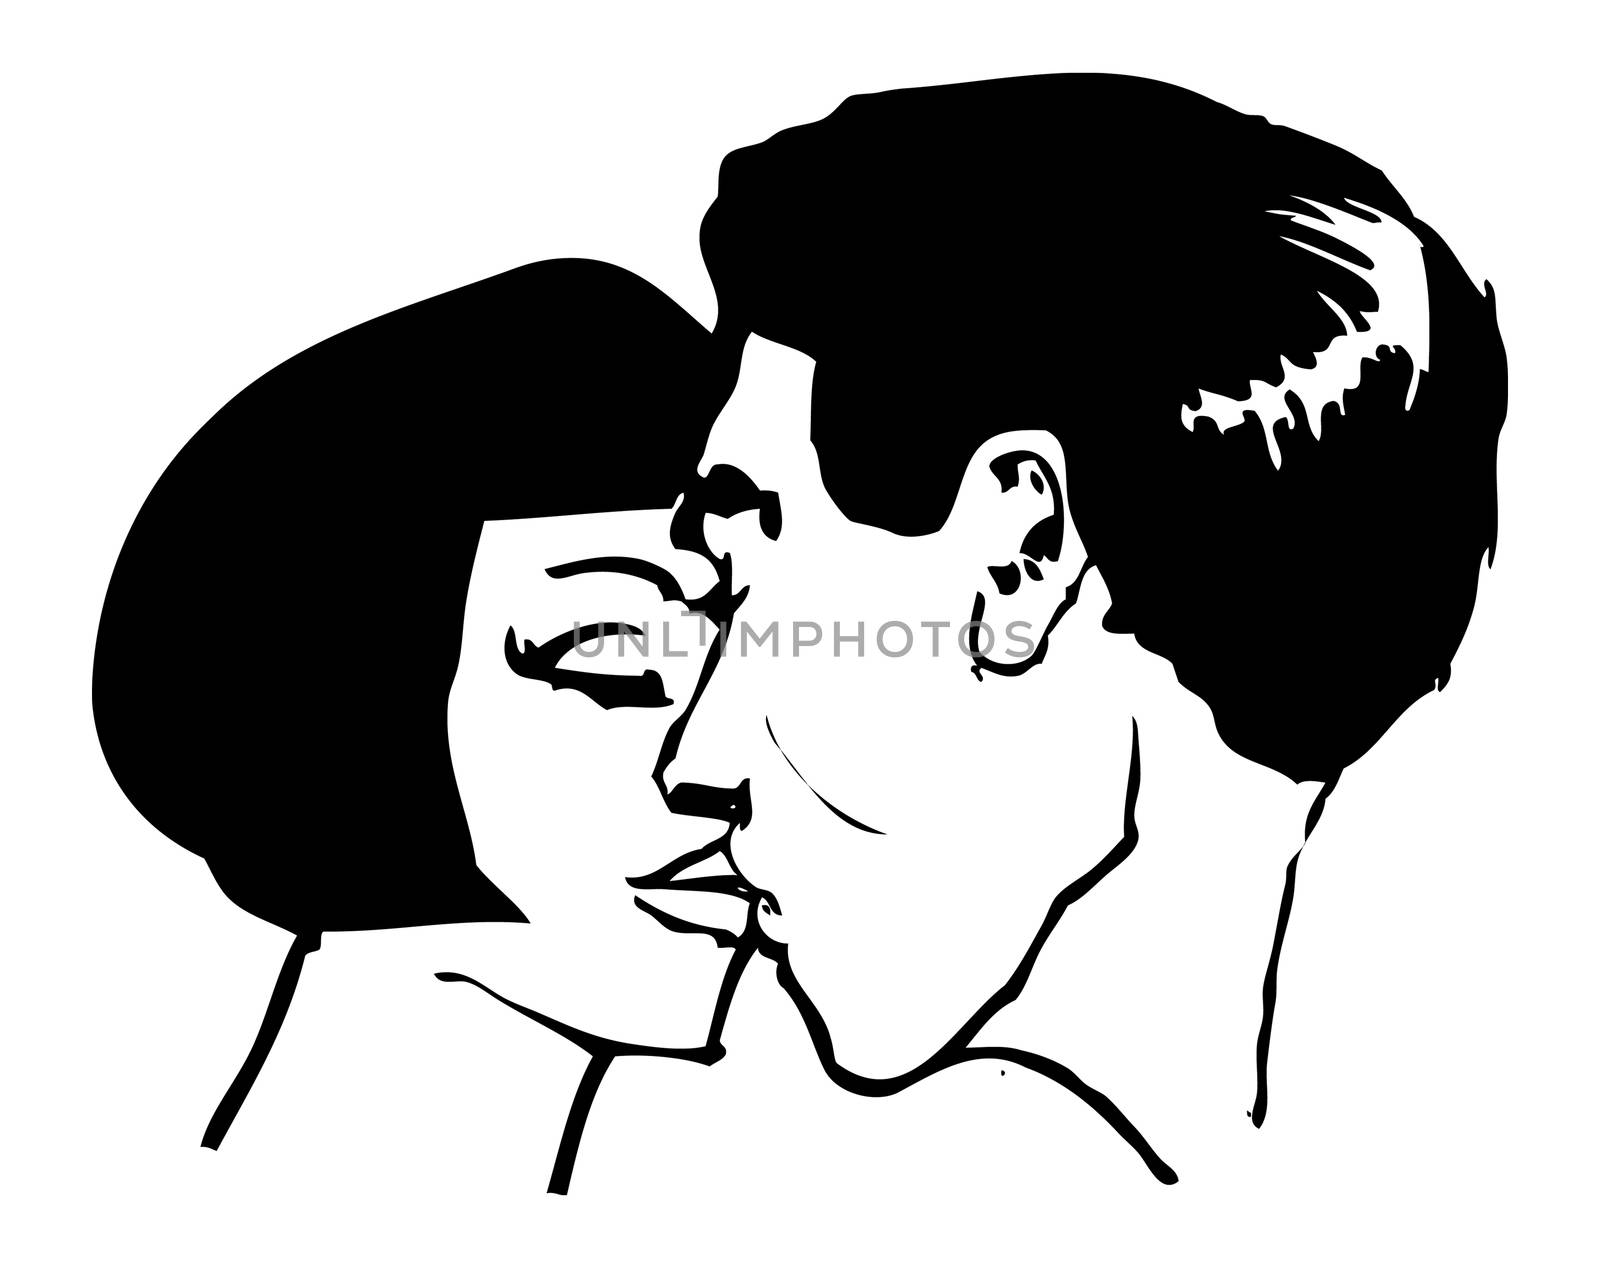 Kissing man and woman Couple in love pop art vector illustration by tamaravector